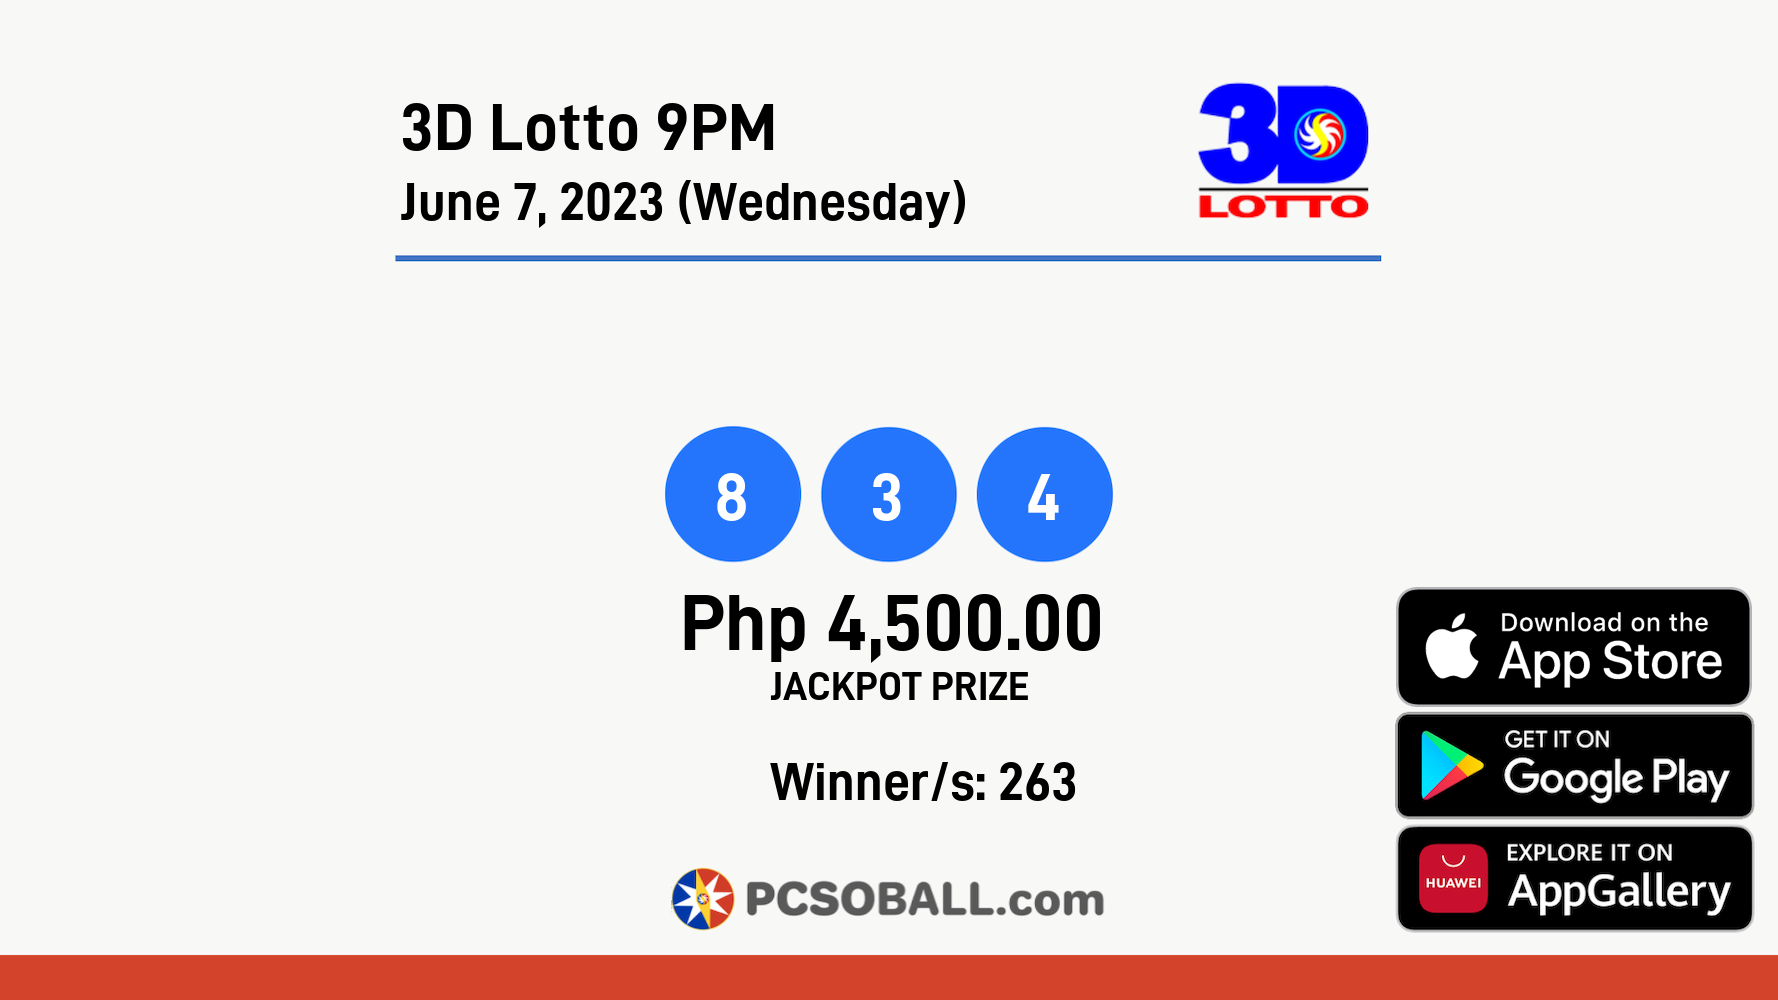 3D Lotto 9PM June 7, 2023 (Wednesday) Result